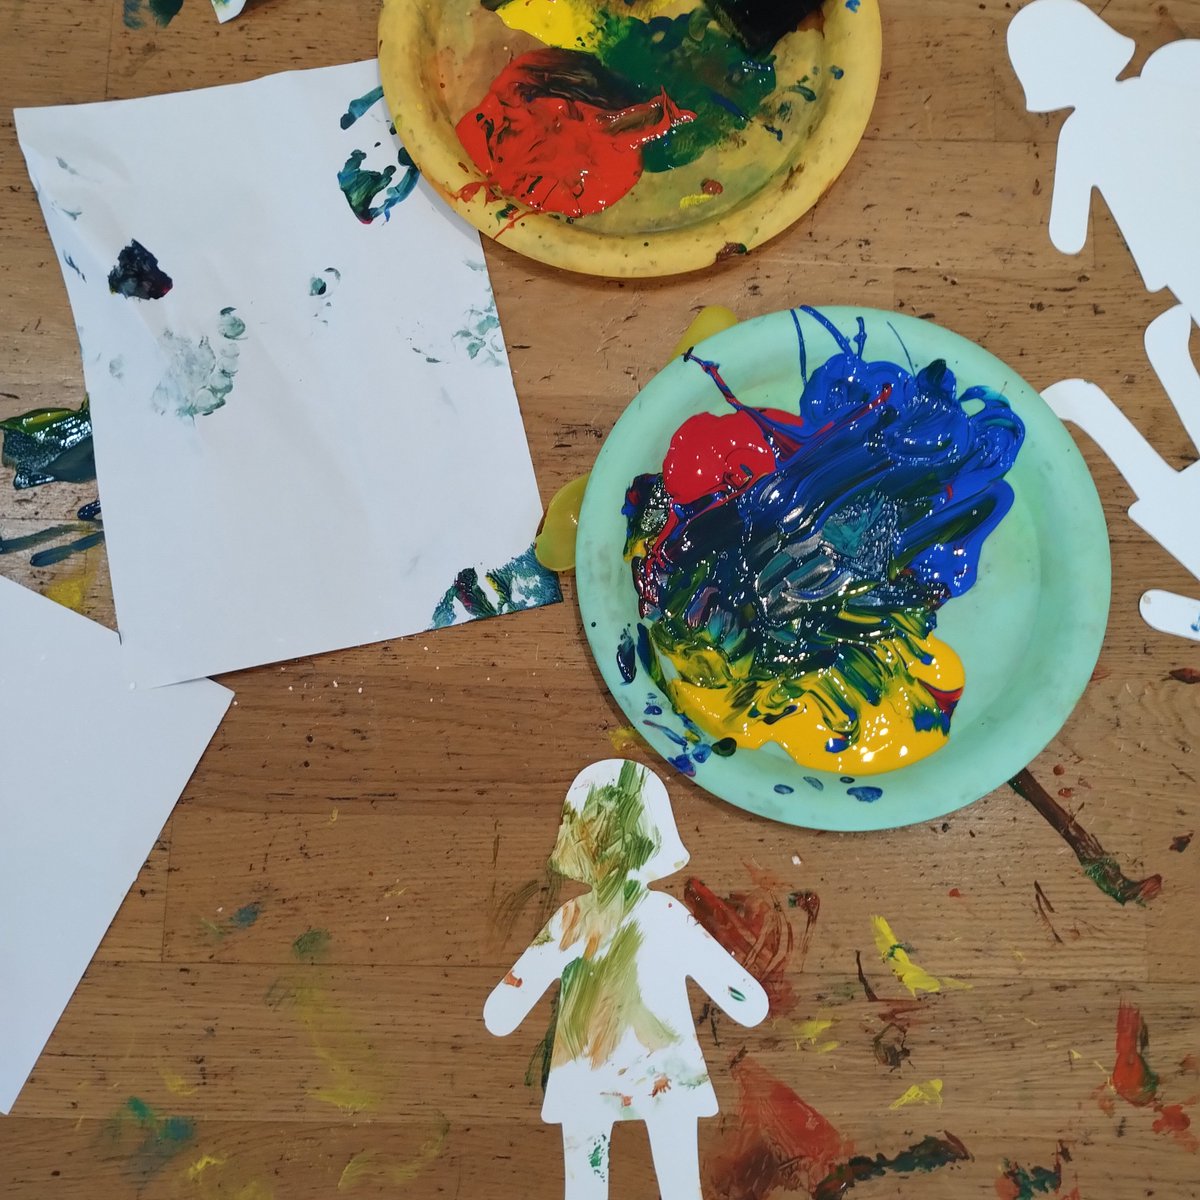 The STROOD pop-up mini nucleus is back on Monday 25 March, 10:30-11:30am 🖍

This will take place at Strood Children and Family Hub 📍

If you would like to book on to this FREE messy play session, email childfriendly@medway.gov.uk 💌

#messyplay #ChildFriendlyMedway